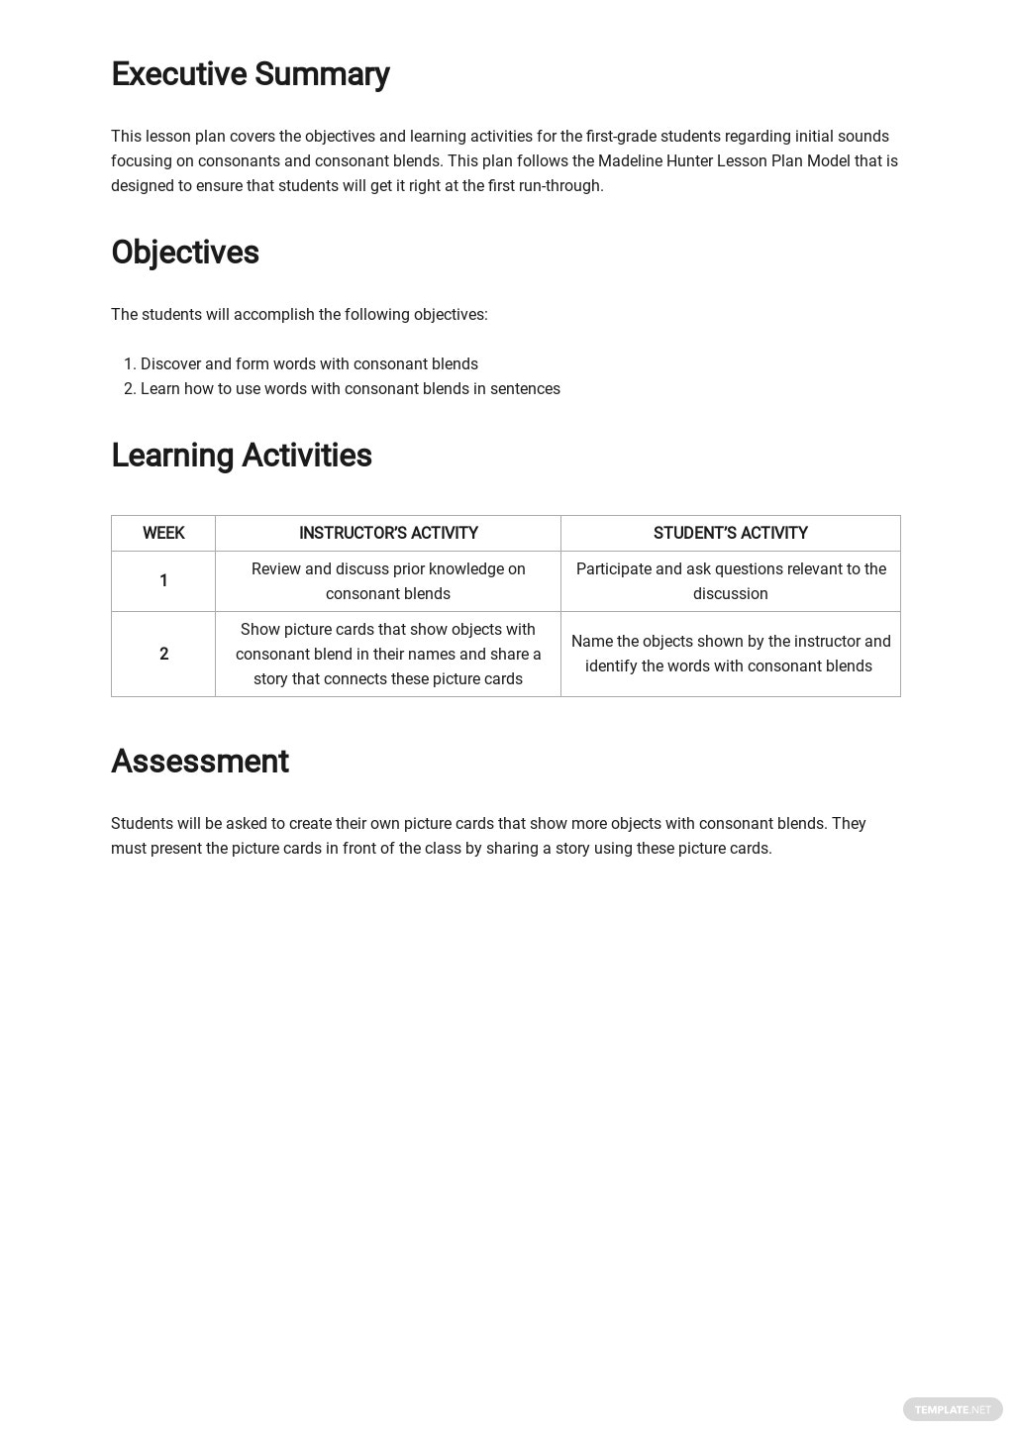 Madeline Hunter Model Lesson Plan Template - Google Docs, Word, Apple Throughout Madeline Hunter Lesson Plan Template Word